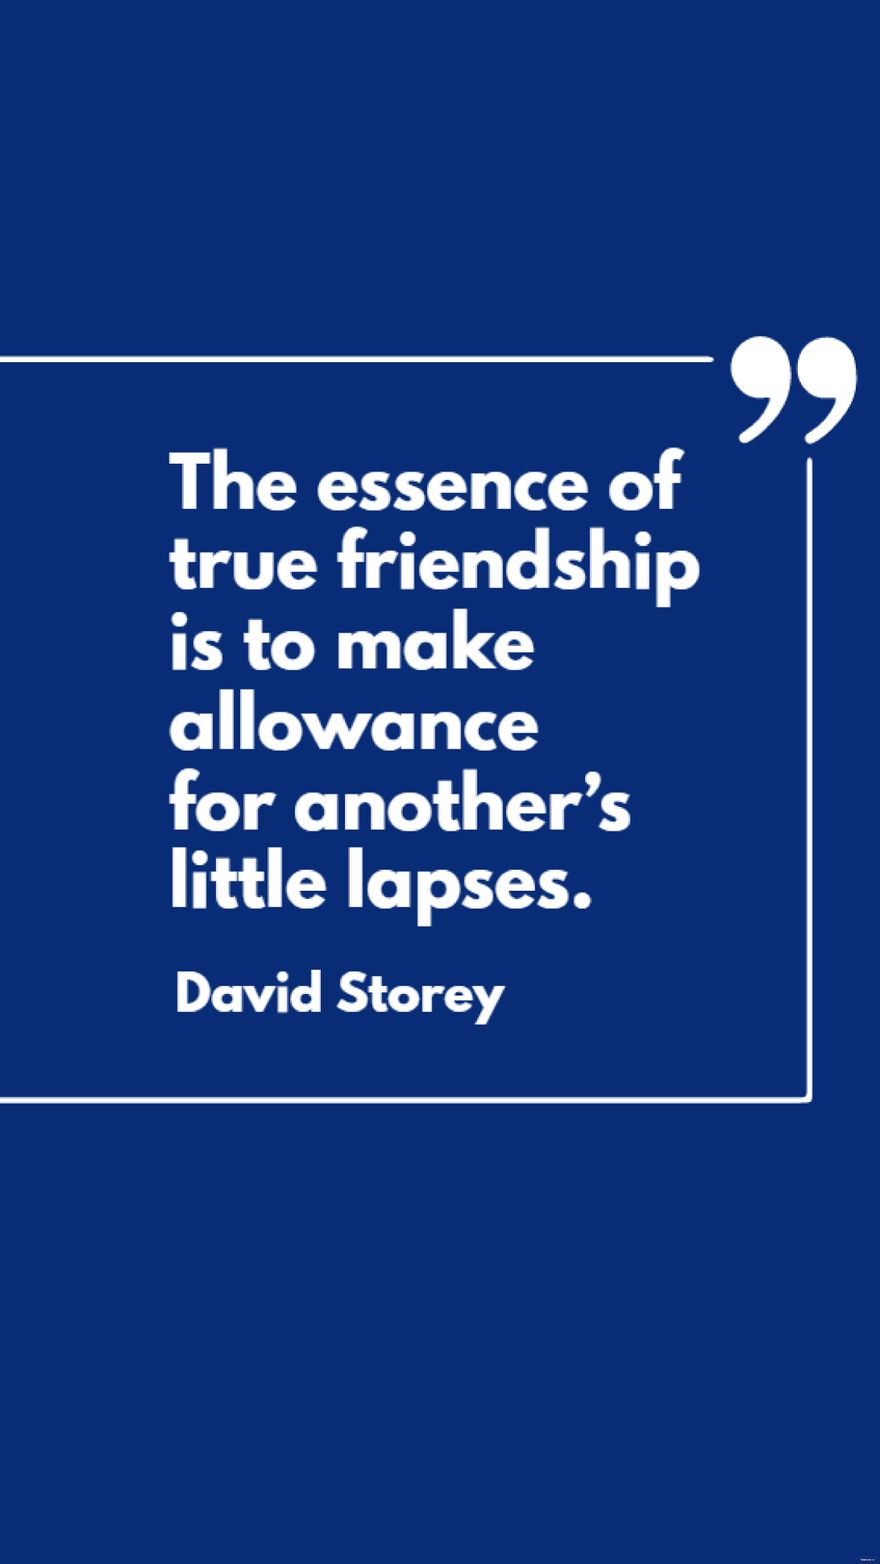 David Storey - The essence of true friendship is to make allowance for another’s little lapses.